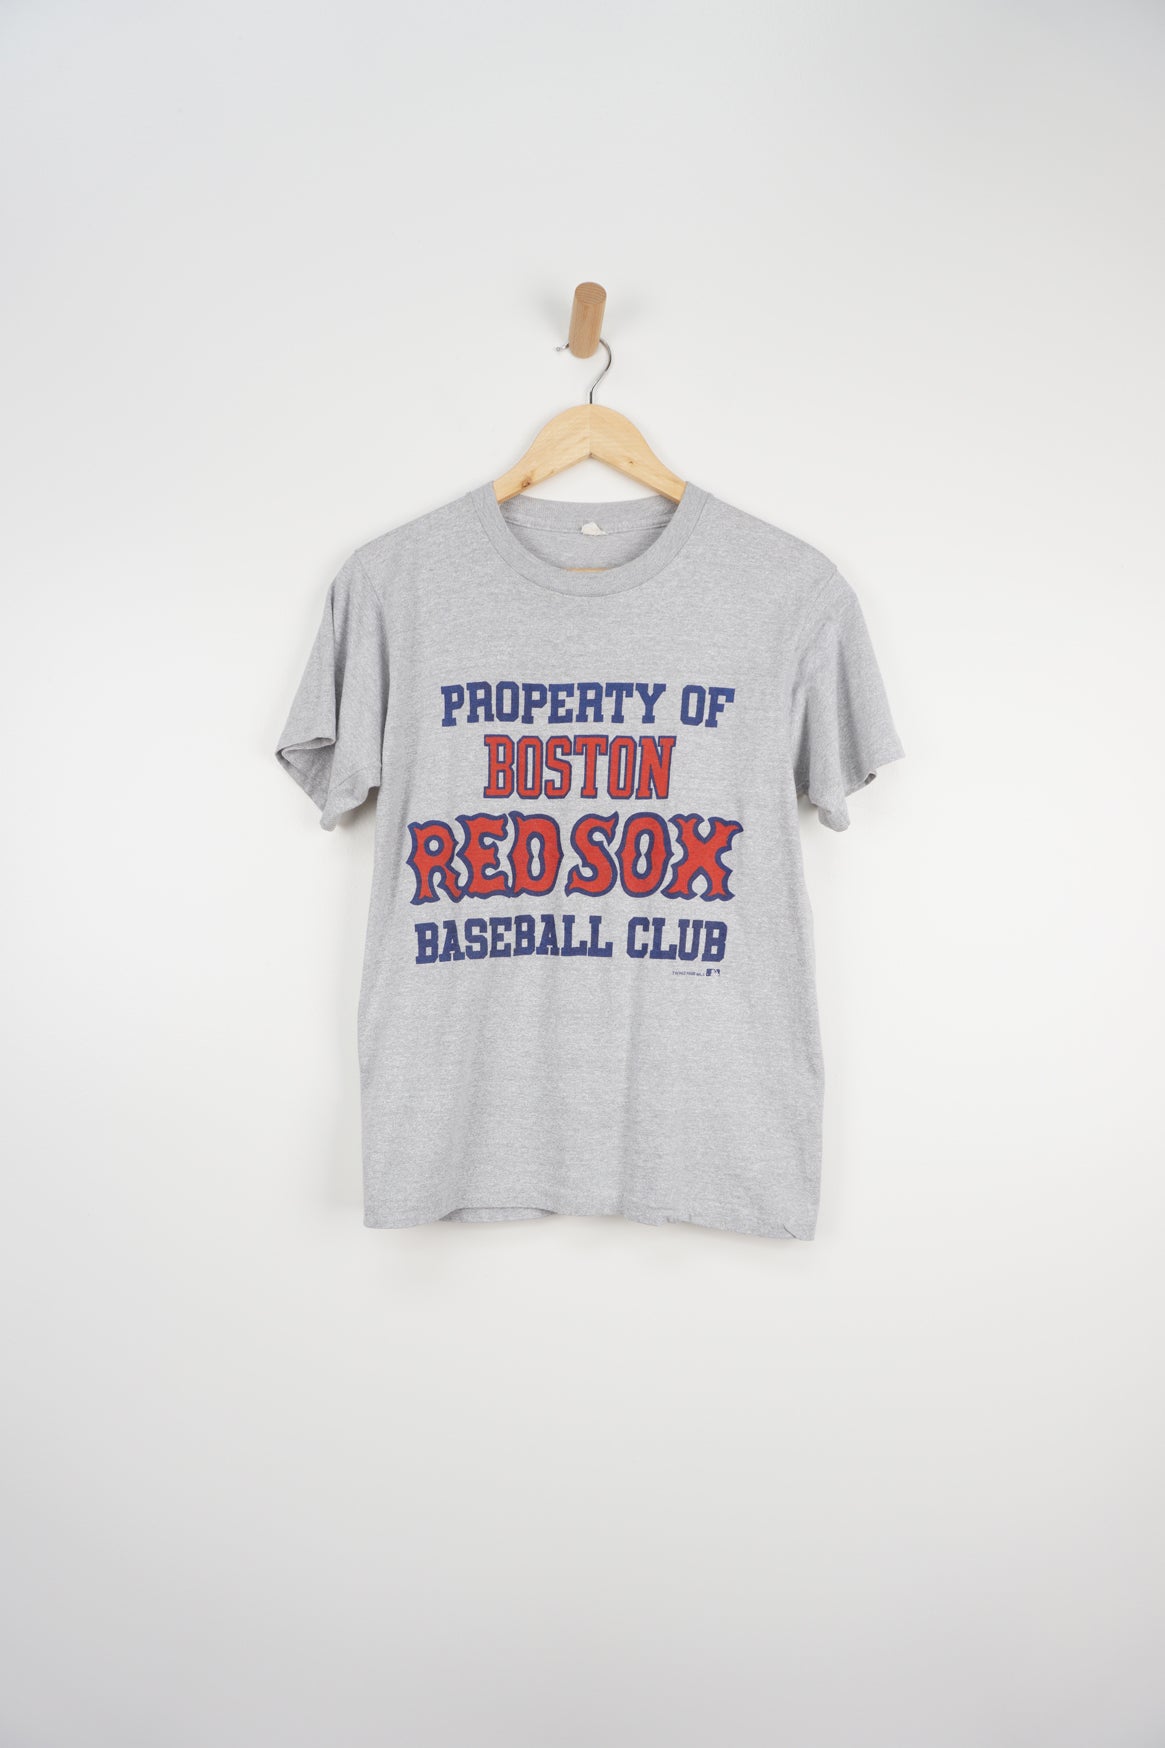 Cheap Boston Red Sox Apparel, Discount Red Sox Gear, MLB Red Sox  Merchandise On Sale